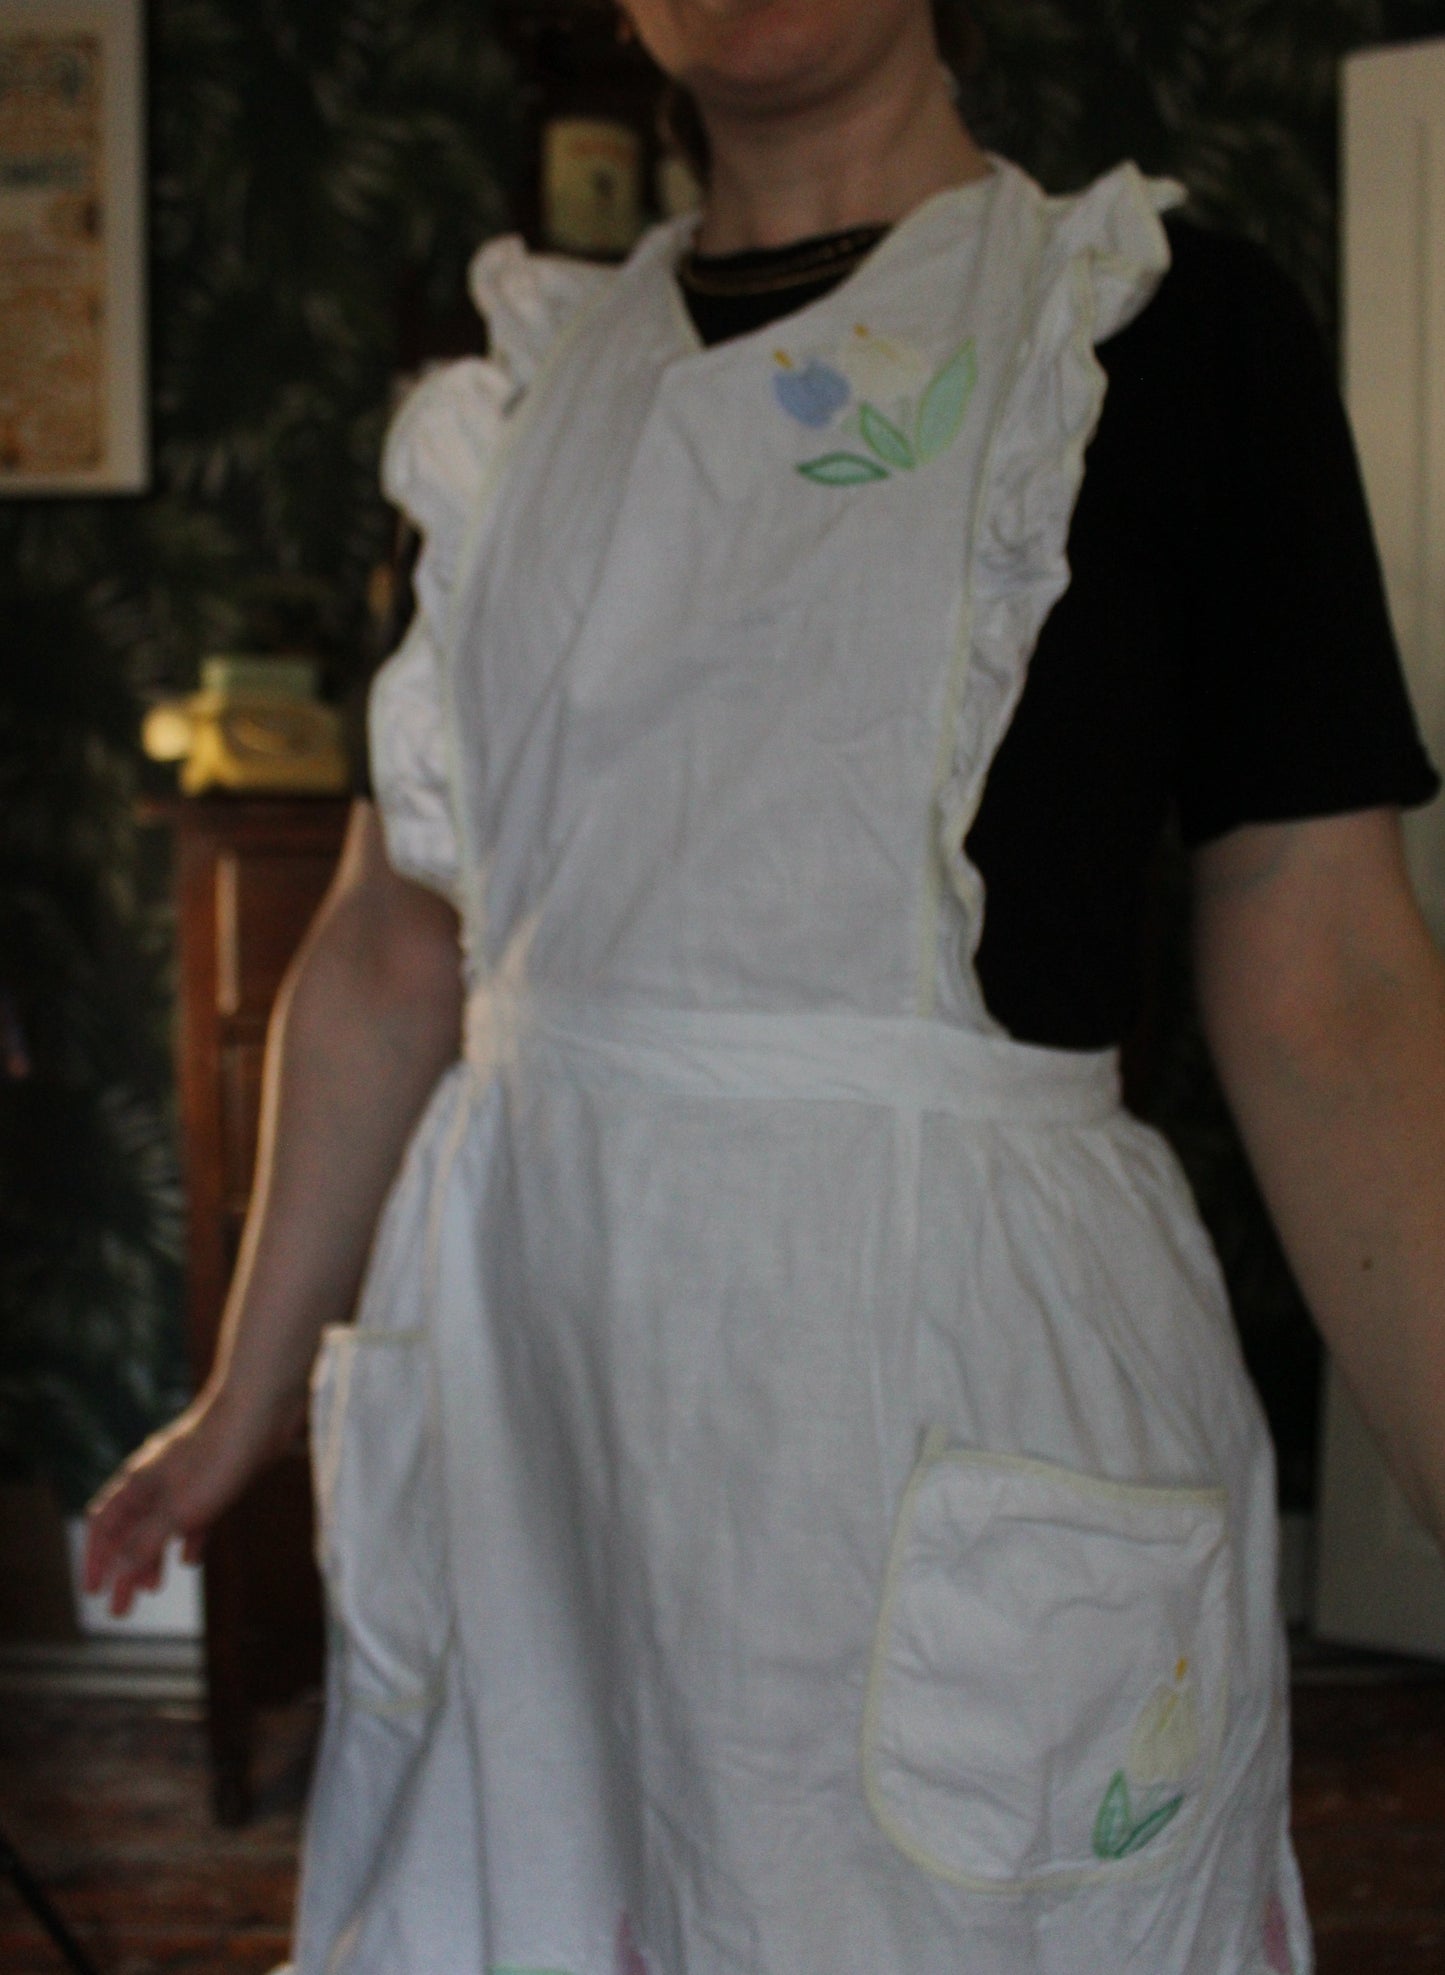 White frilly apron with floral panels